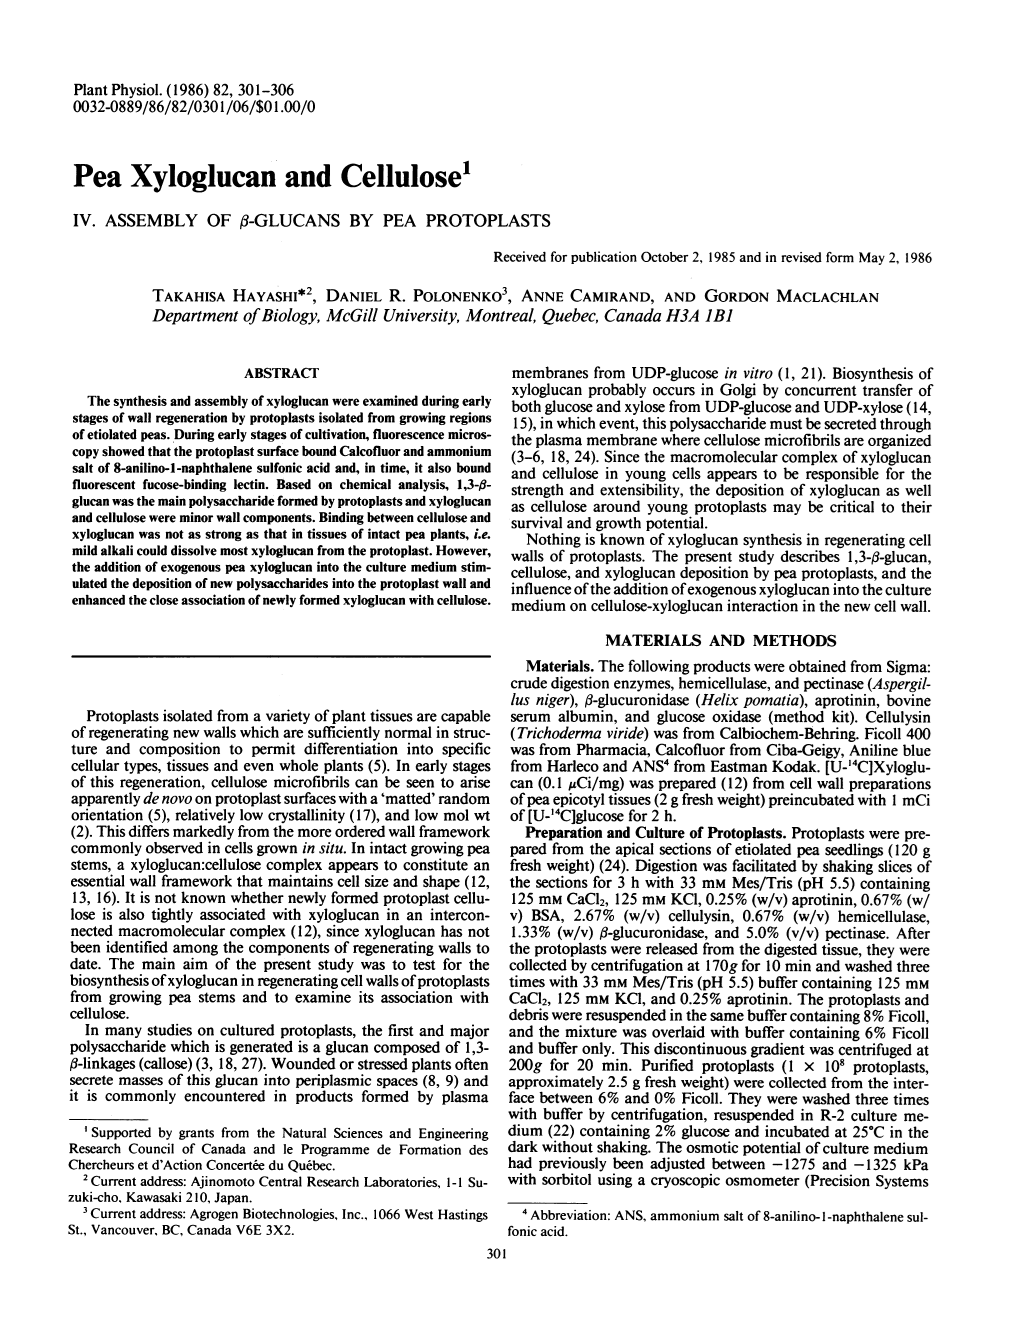 Pea Xyloglucan and Cellulosel IV